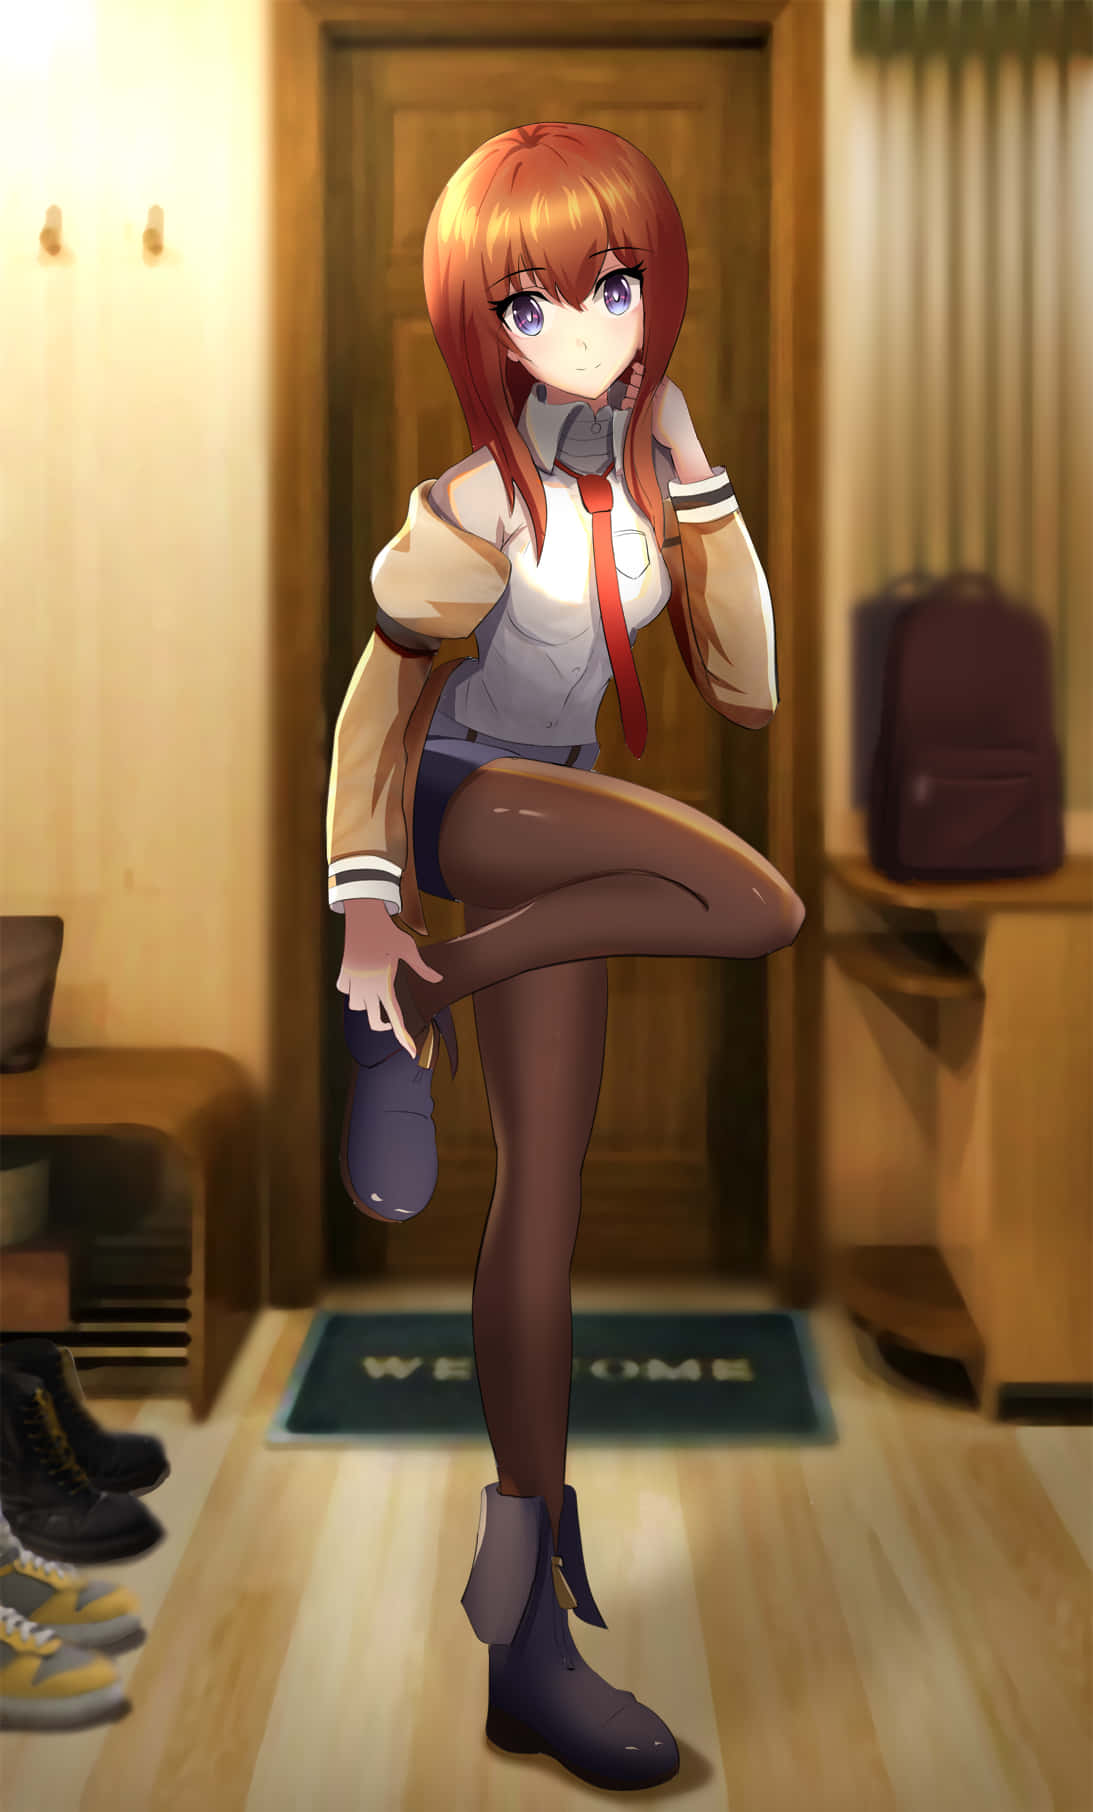 Kurisu Makise deep in thought in a moment of stunning brilliance Wallpaper